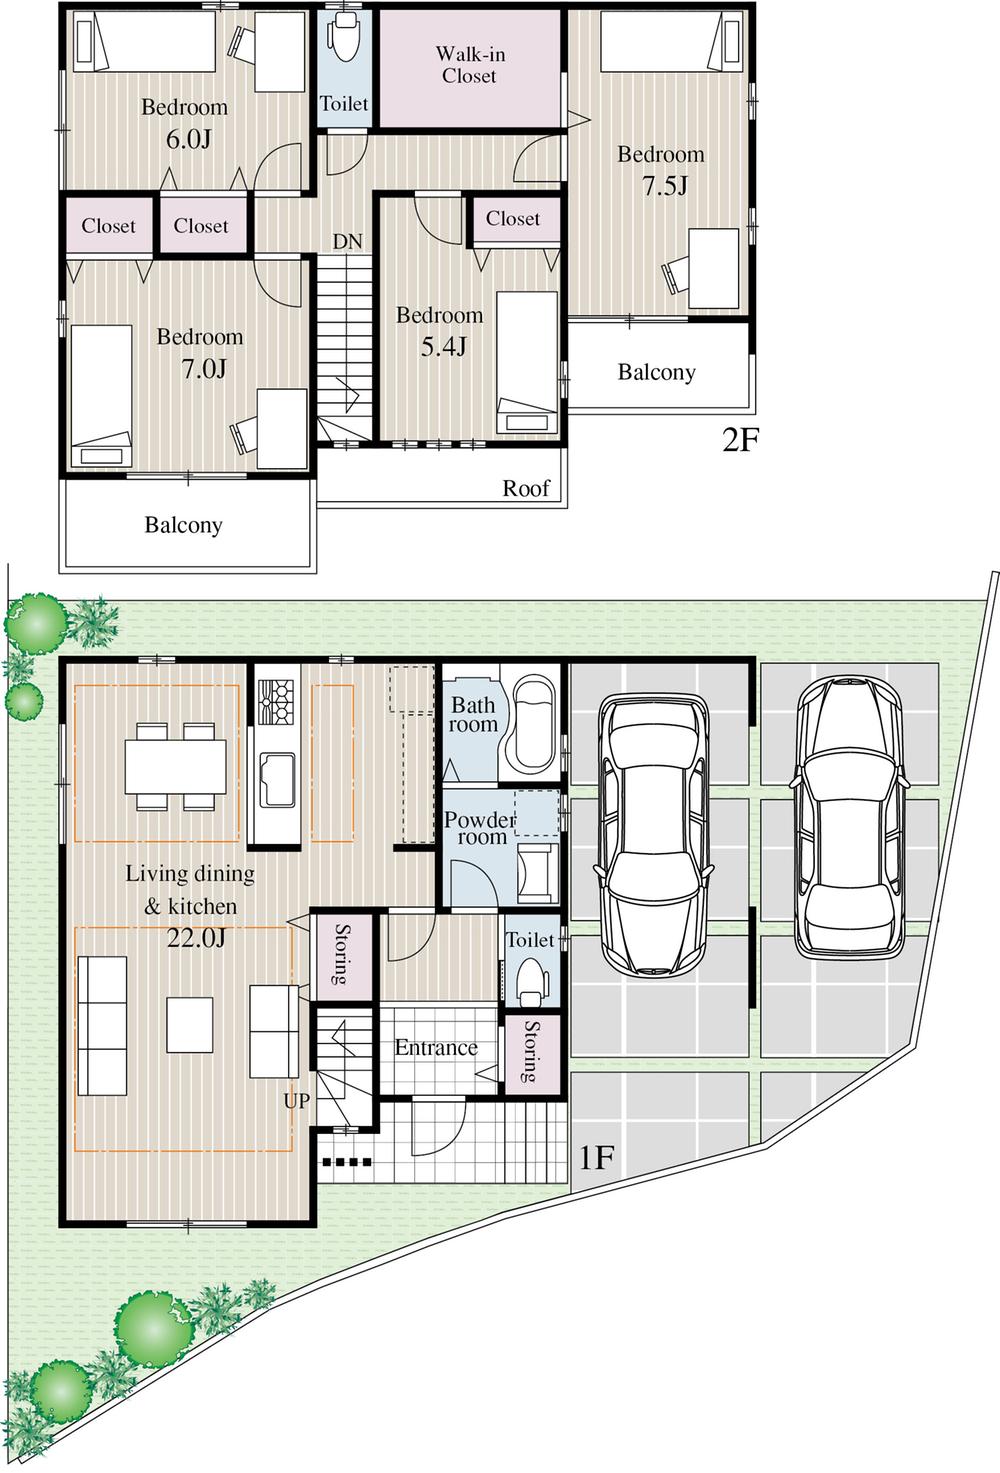 Other building plan example. No. 2 place Building plan example